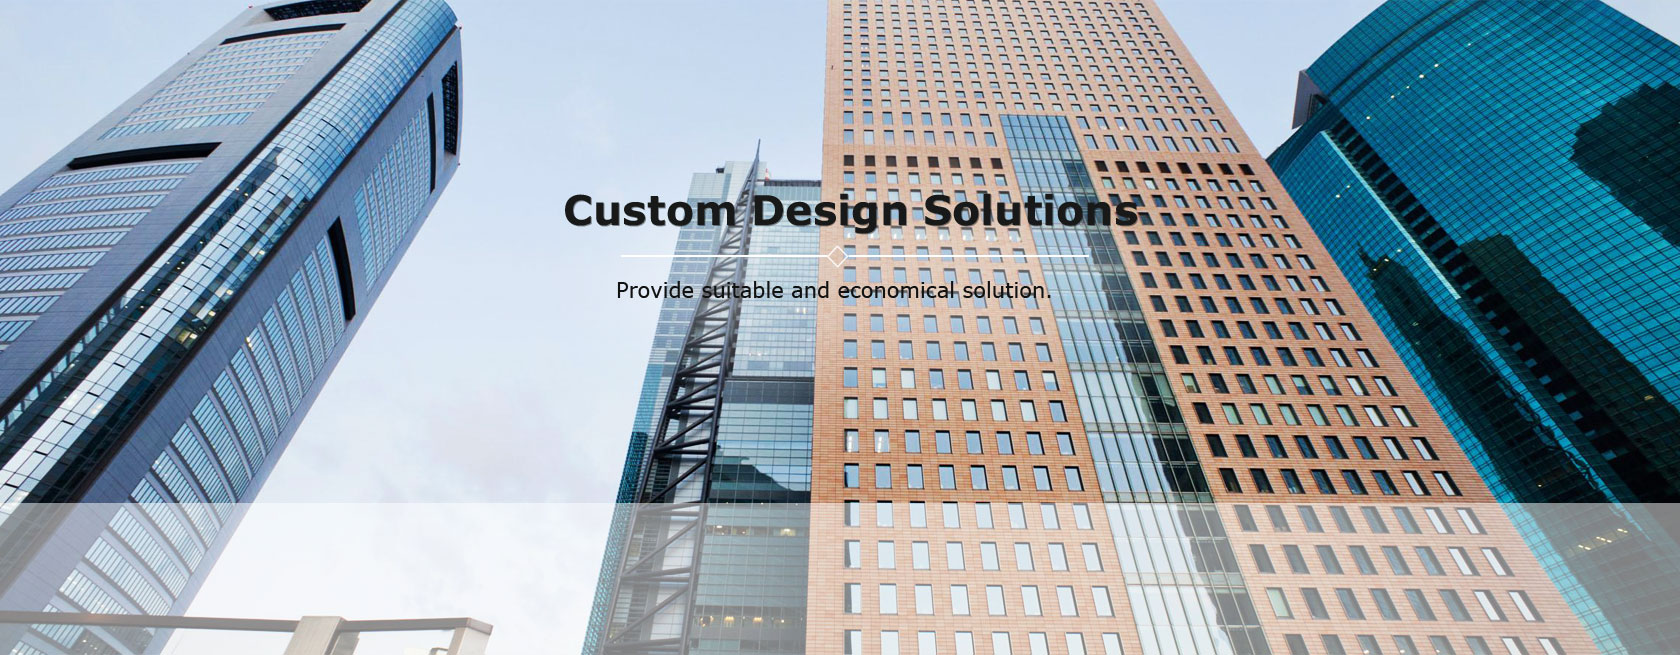 Custom design solutions. Provide suitable and economical solution.